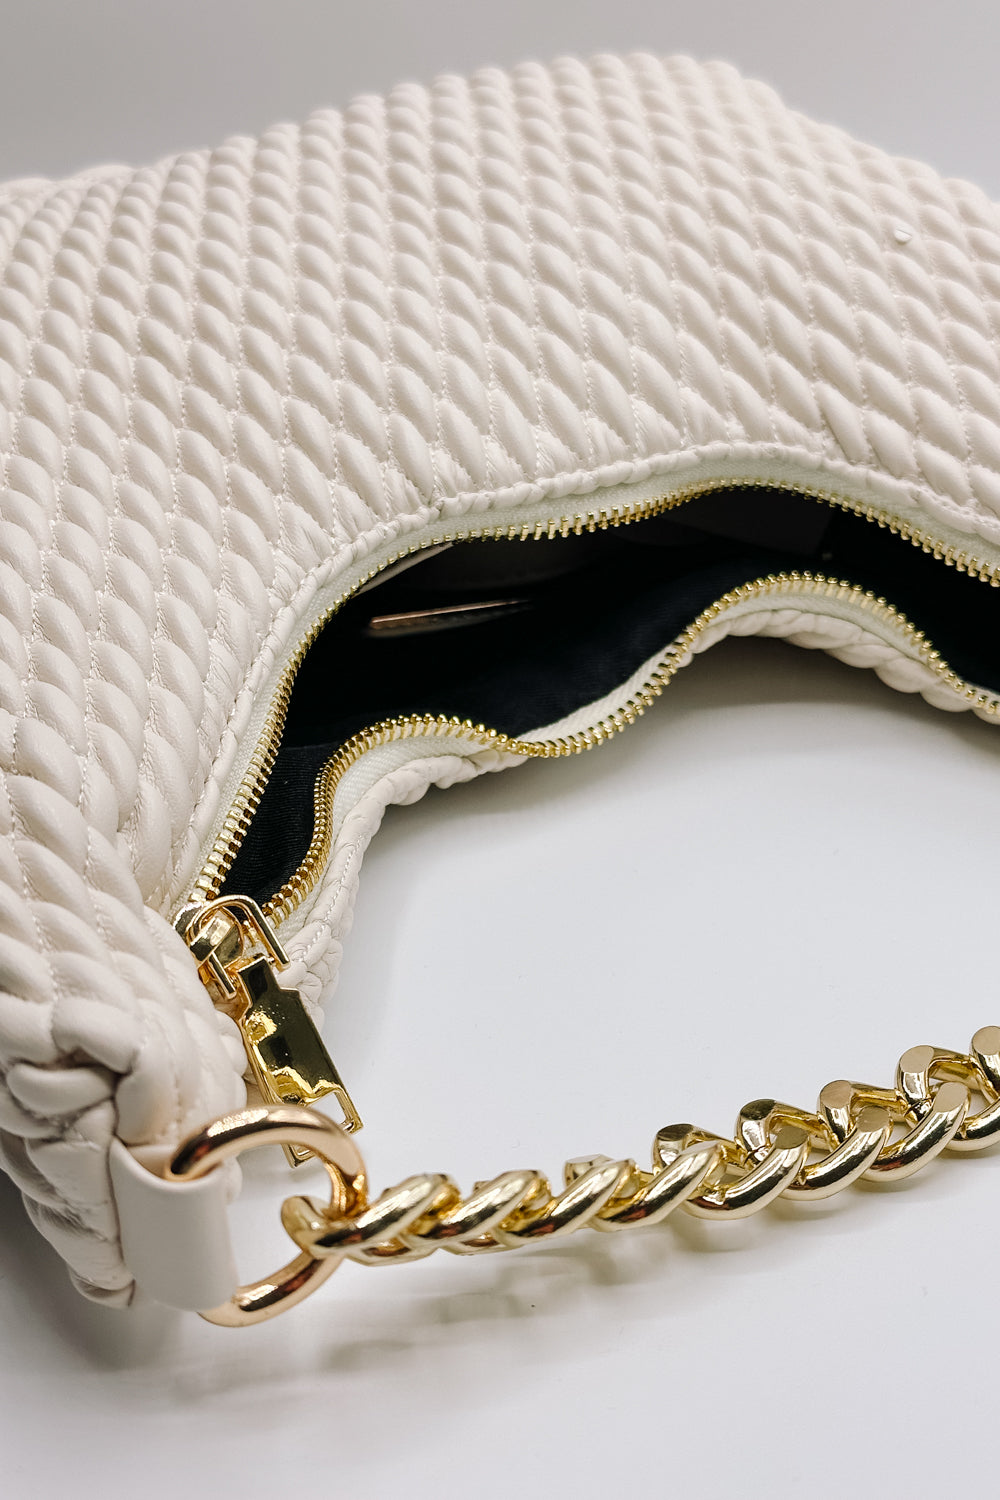 Front view of the Jade Cream & Gold Chain Strap Purse which features cream woven design fabric, black lining, gold chain strap and gold zipper closure